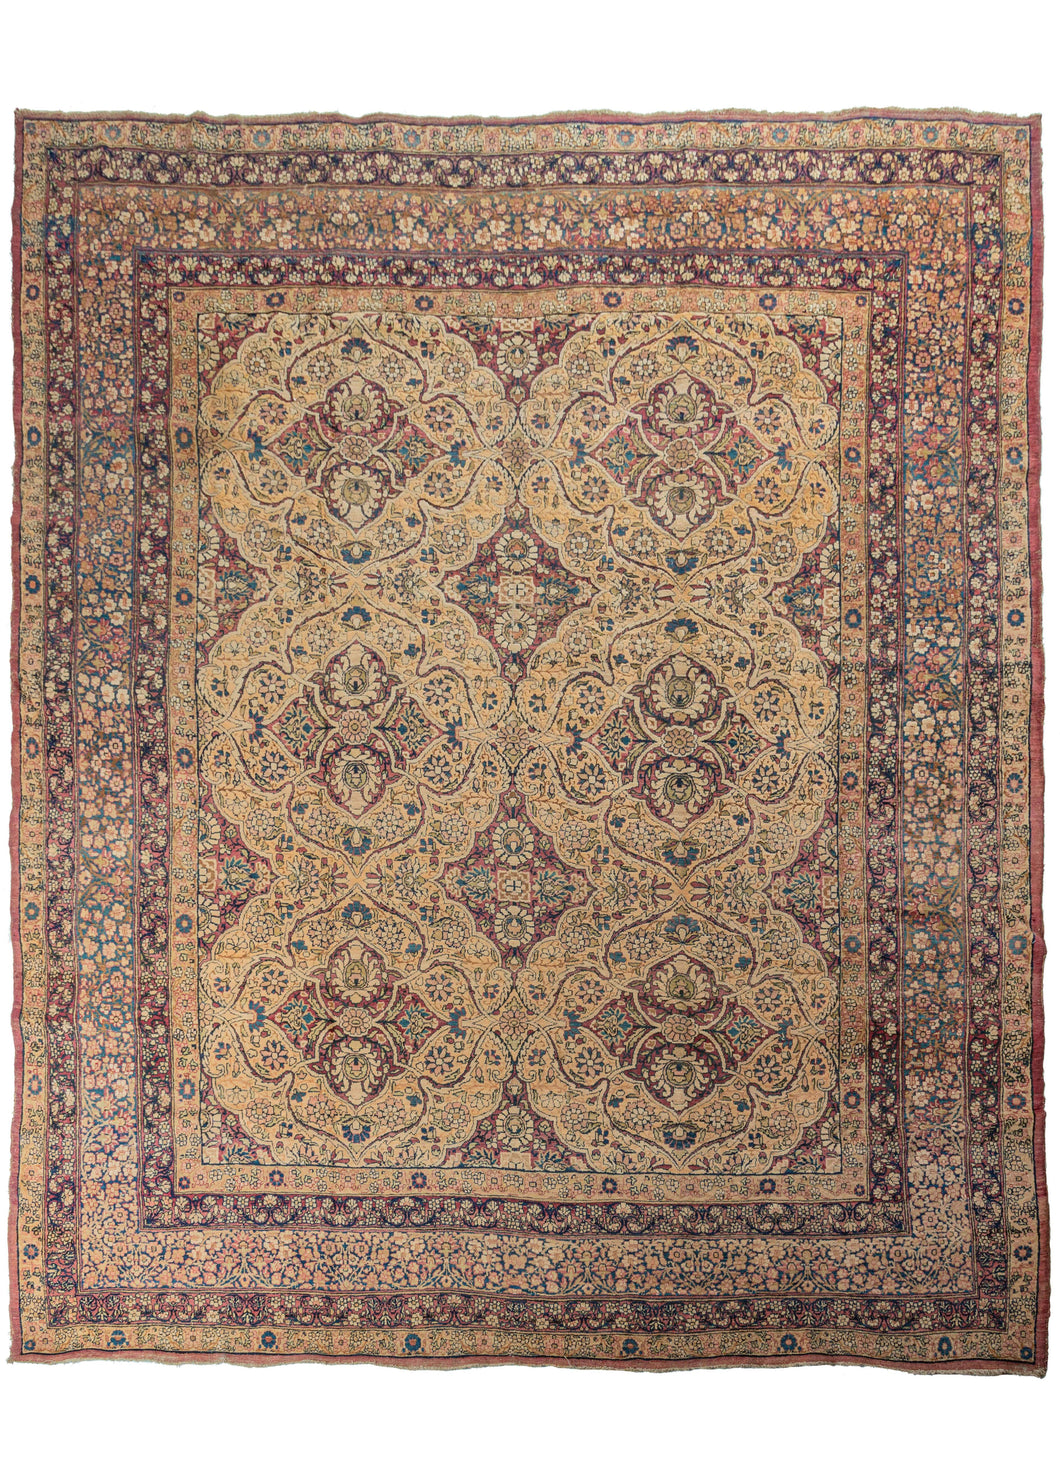 Antique Persian Lavar Kerman carpet featuring a curvilinear floral design with six scalloped medallions and is finely woven in golden yellow and wine purple. The design plays with positive and negative space in a sophisticated and subtle manner. The five borders are just as elaborately patterned as the main field, continuing the curvilinear floral motif. They are composed of varied sprigs and meanders and show off the artful use of indigo blue for the details.   